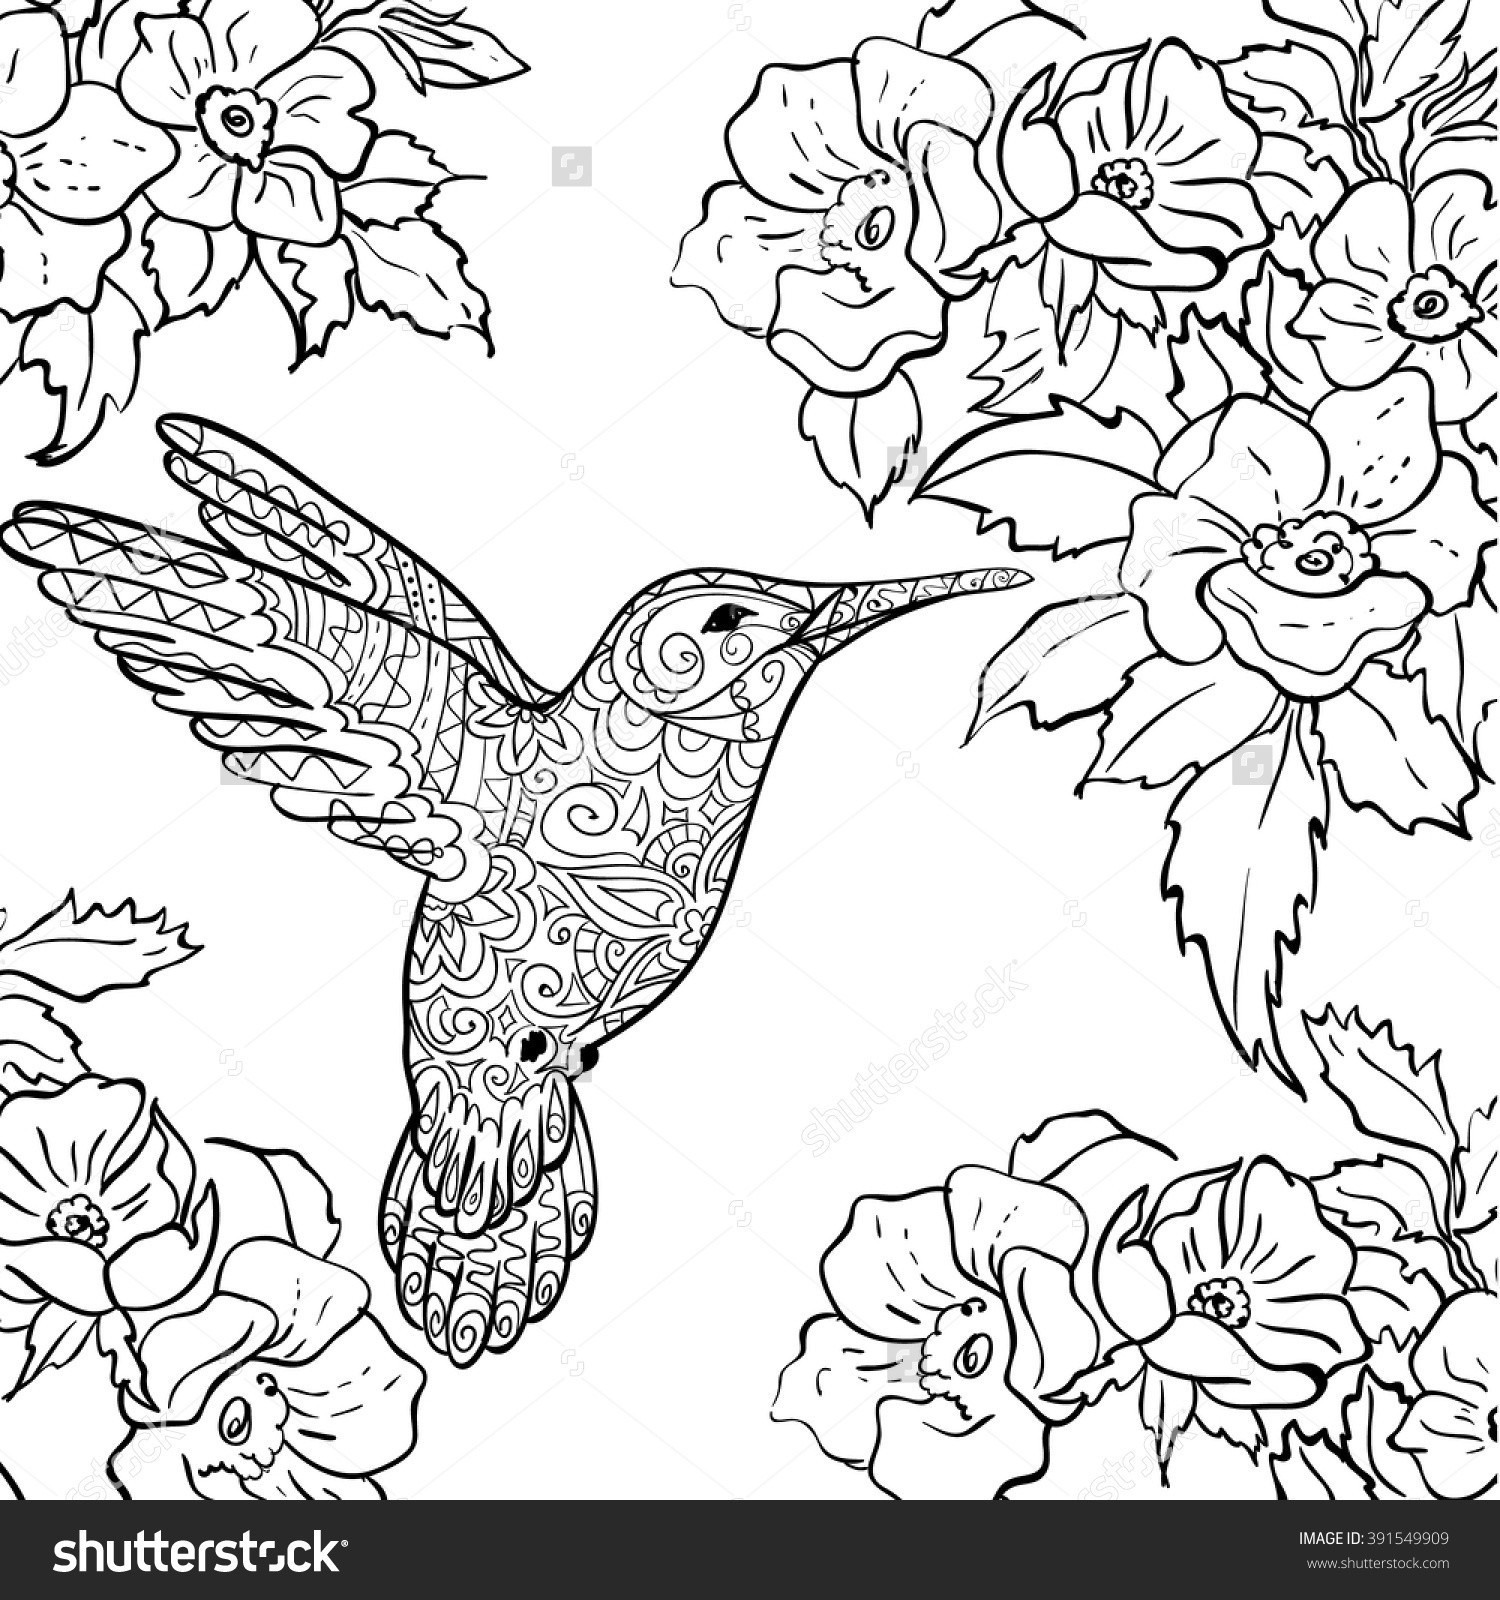 Hummingbird Coloring Pages For Adults at GetDrawings | Free download